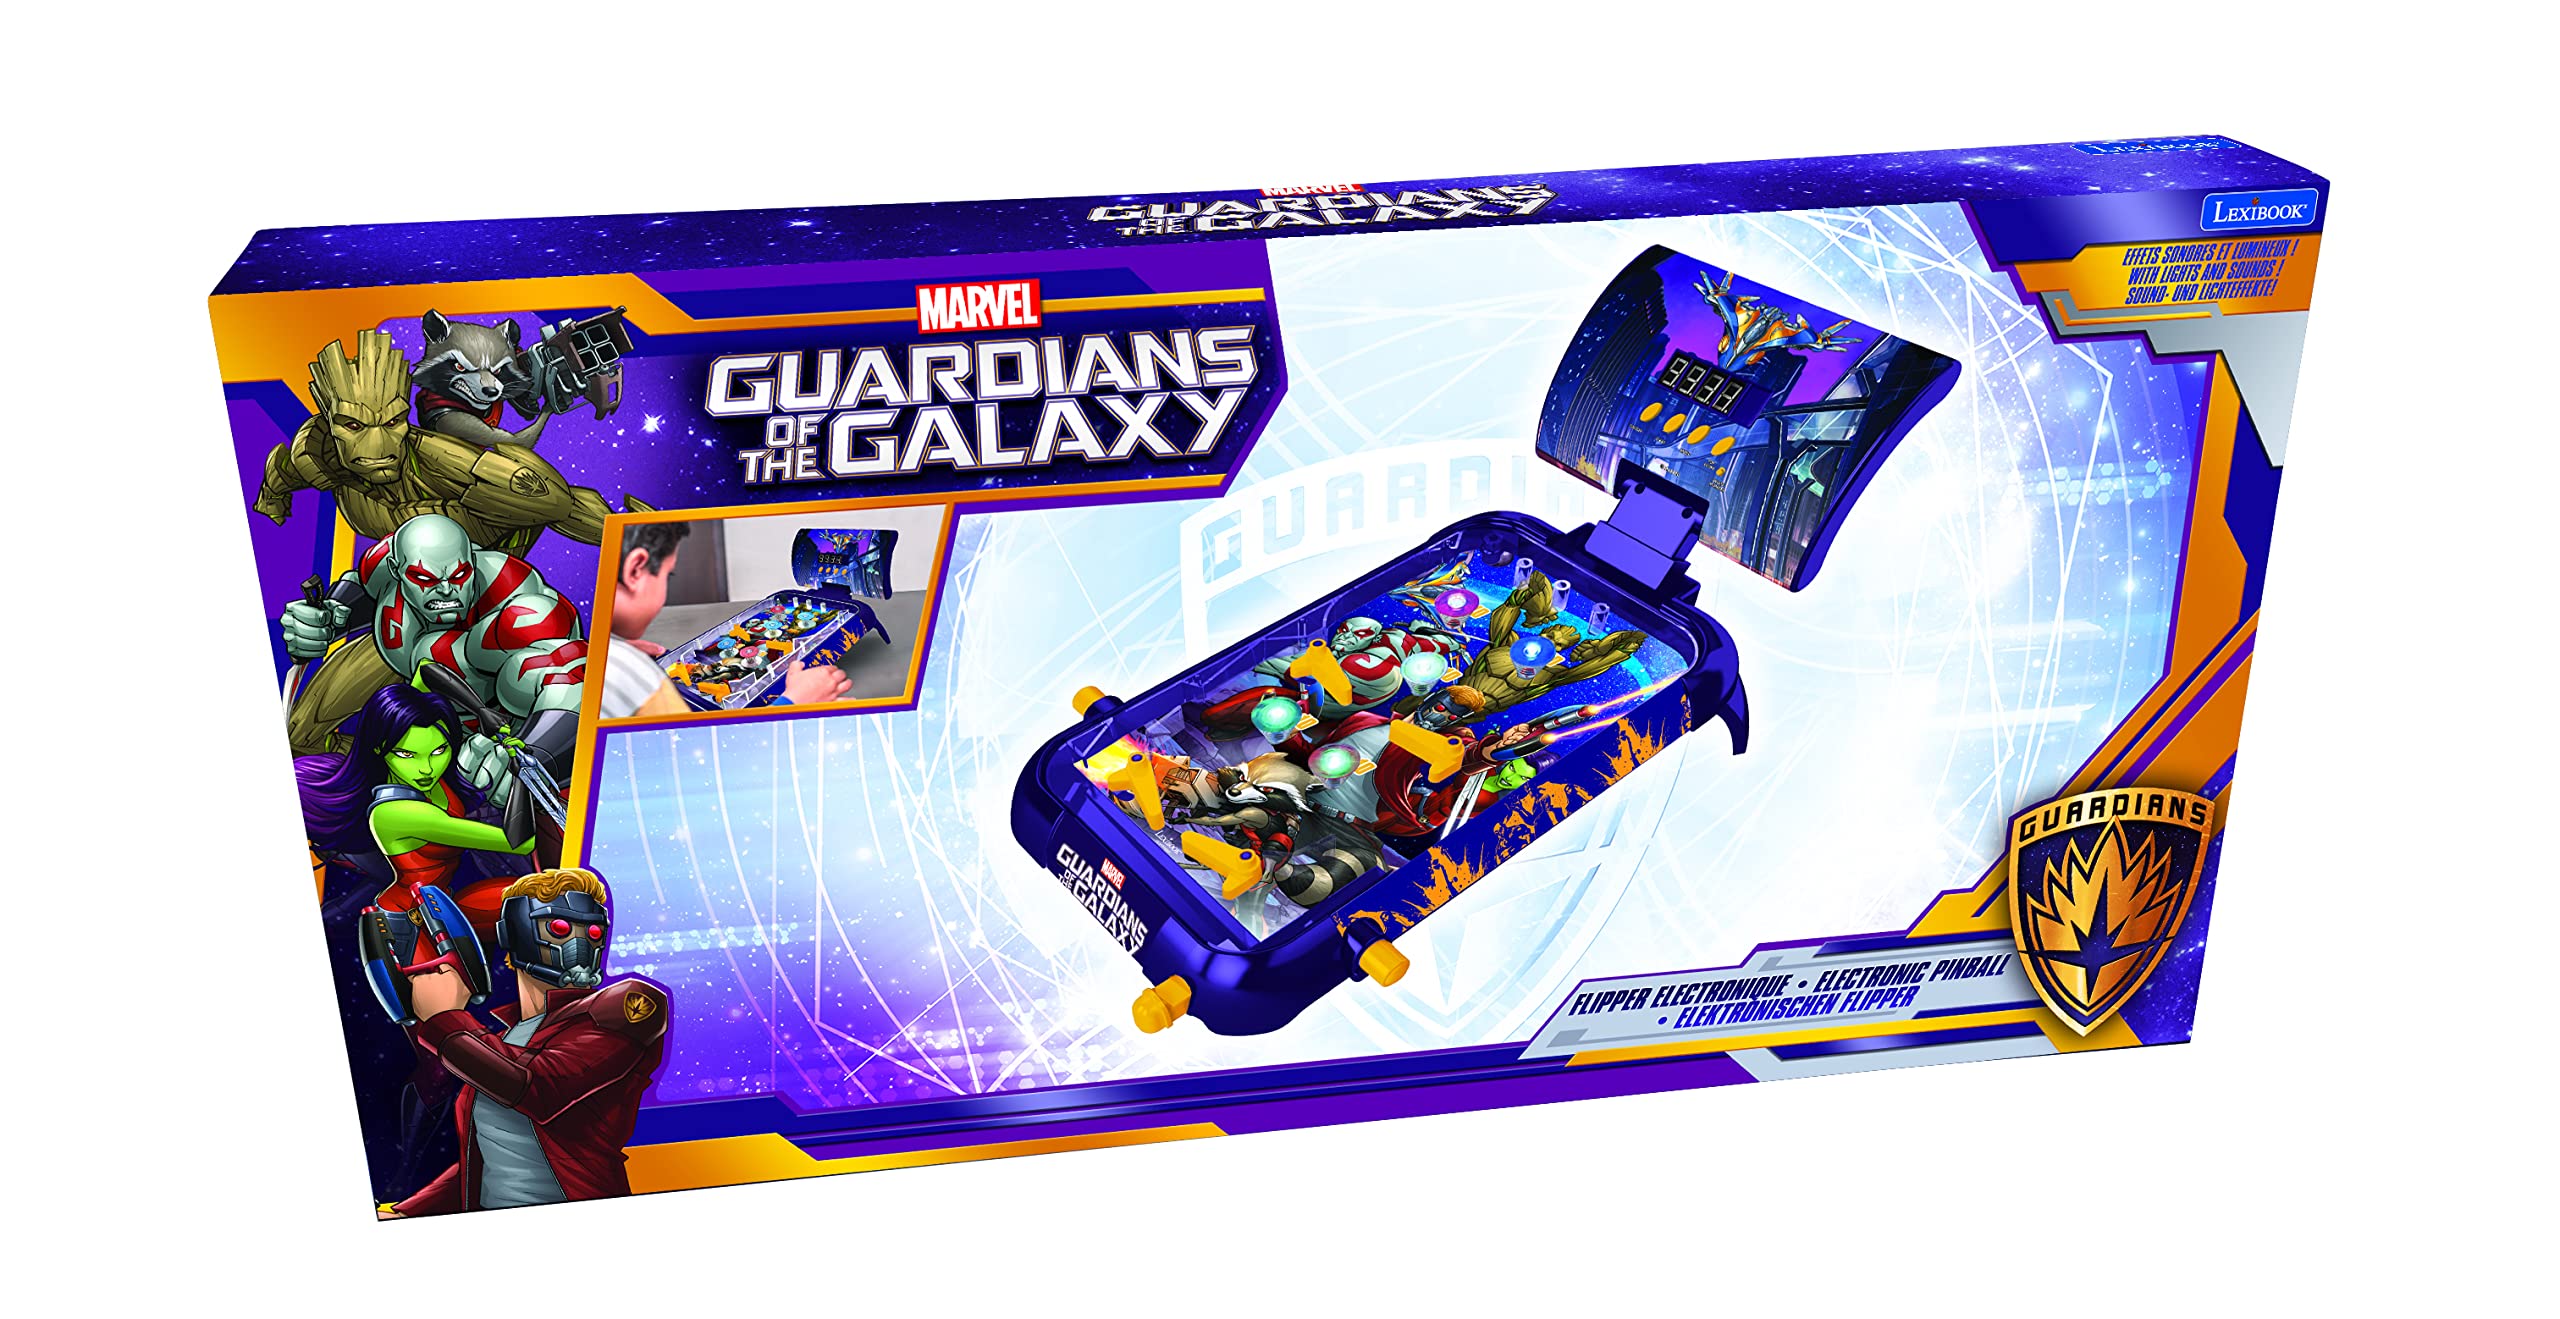 Lexibook - Marvel Guardians of the Galaxy table electronic pinball, action and reflex game for children and family, LCD screen, light and sound effects, purple, JG610GG